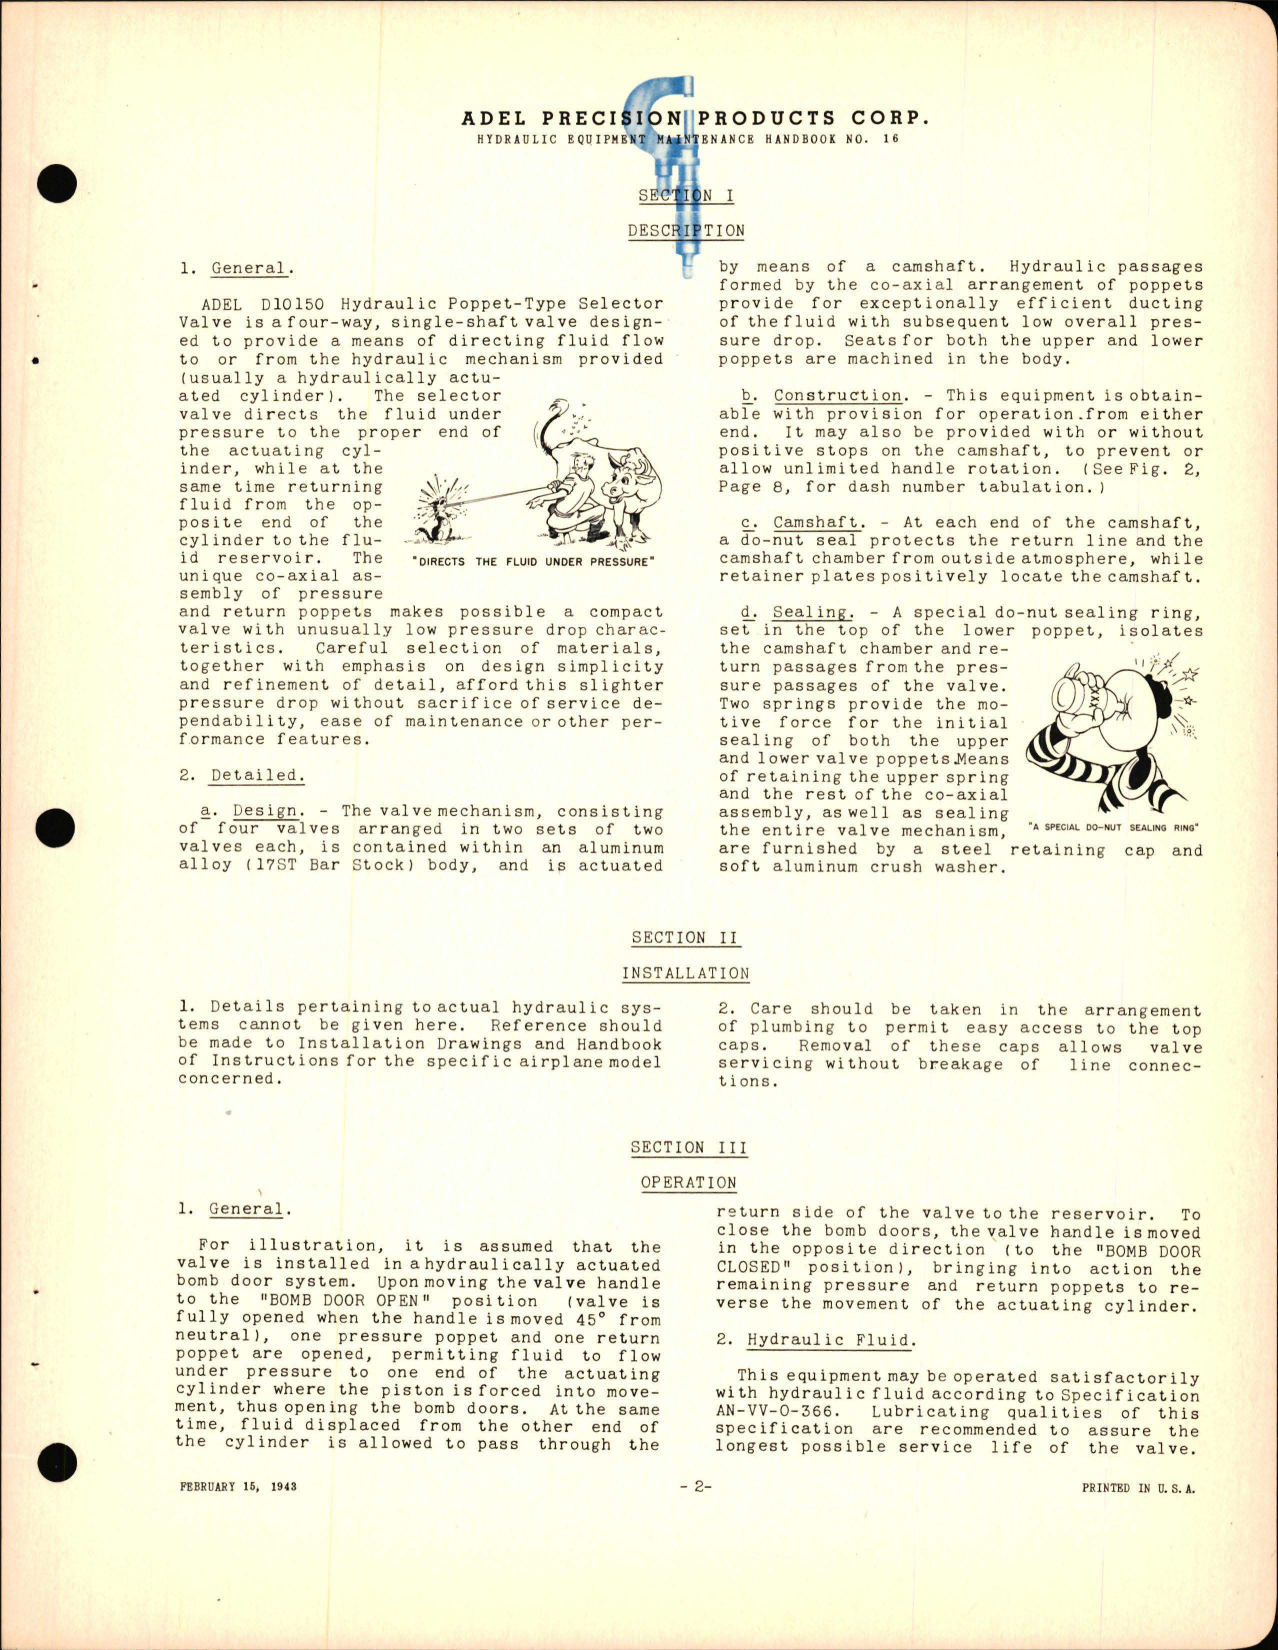 Sample page 7 from AirCorps Library document: Instructions with Parts Catalog for Dural Seat Single Four Way Selector Valve - D10150 